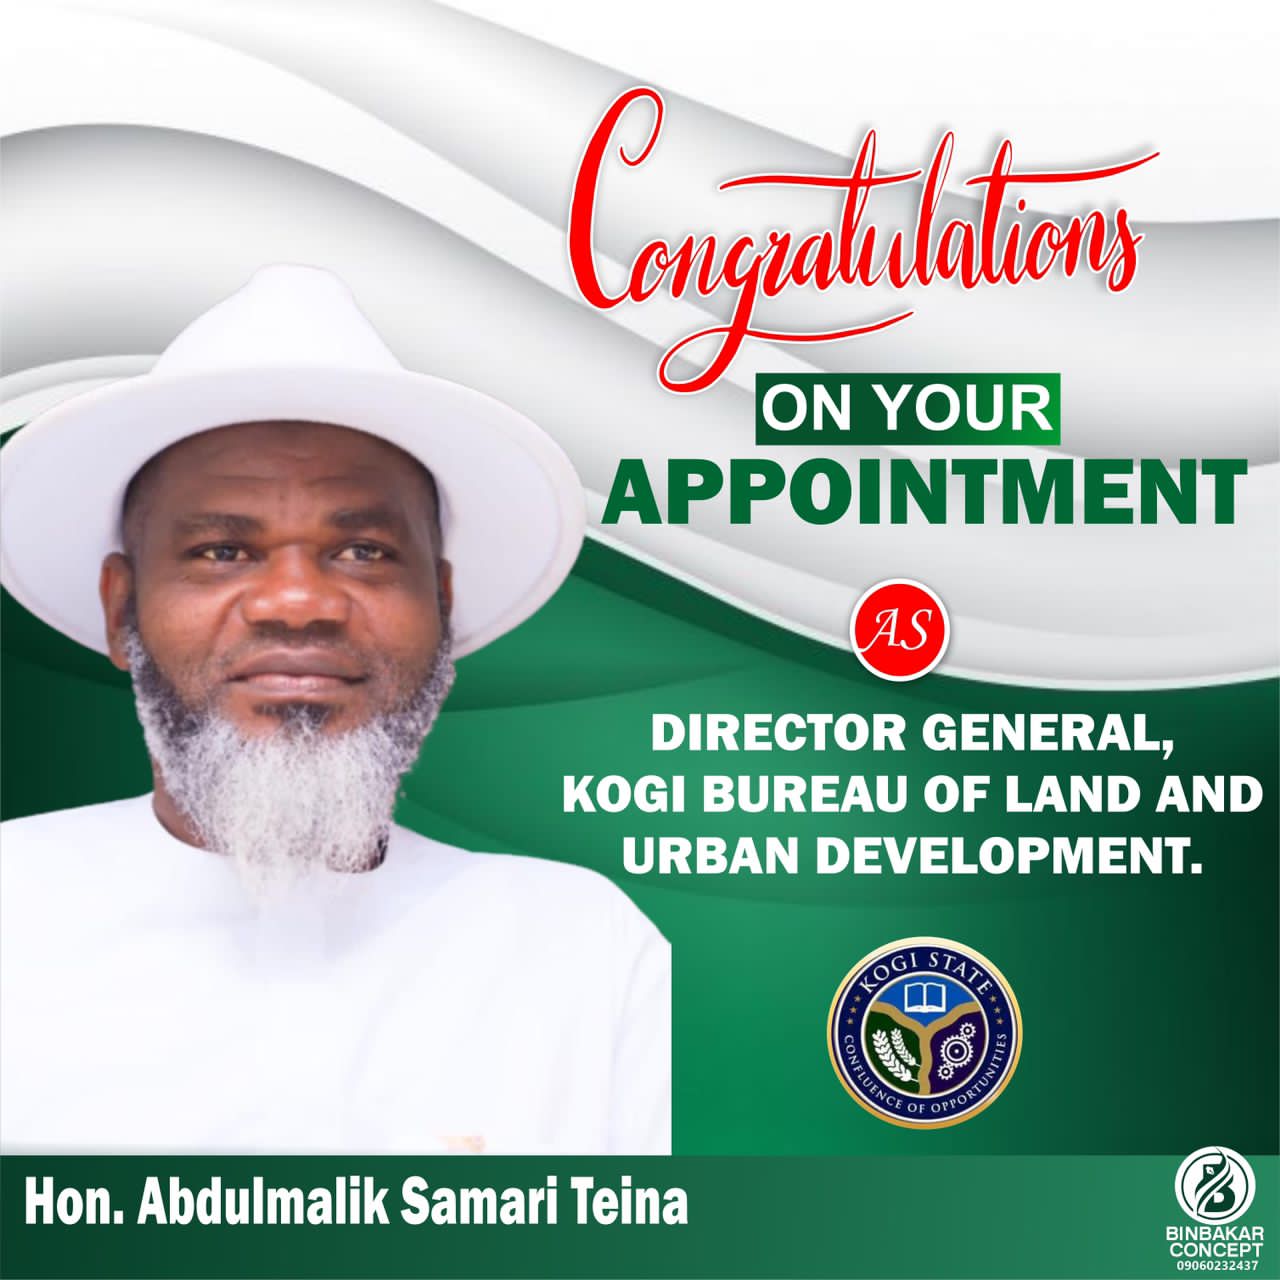 A NEW CHAPTER FOR KOGI STATE: Hon. Teina's Appointment as DG Kogi Bureau of Lands and Urban Development